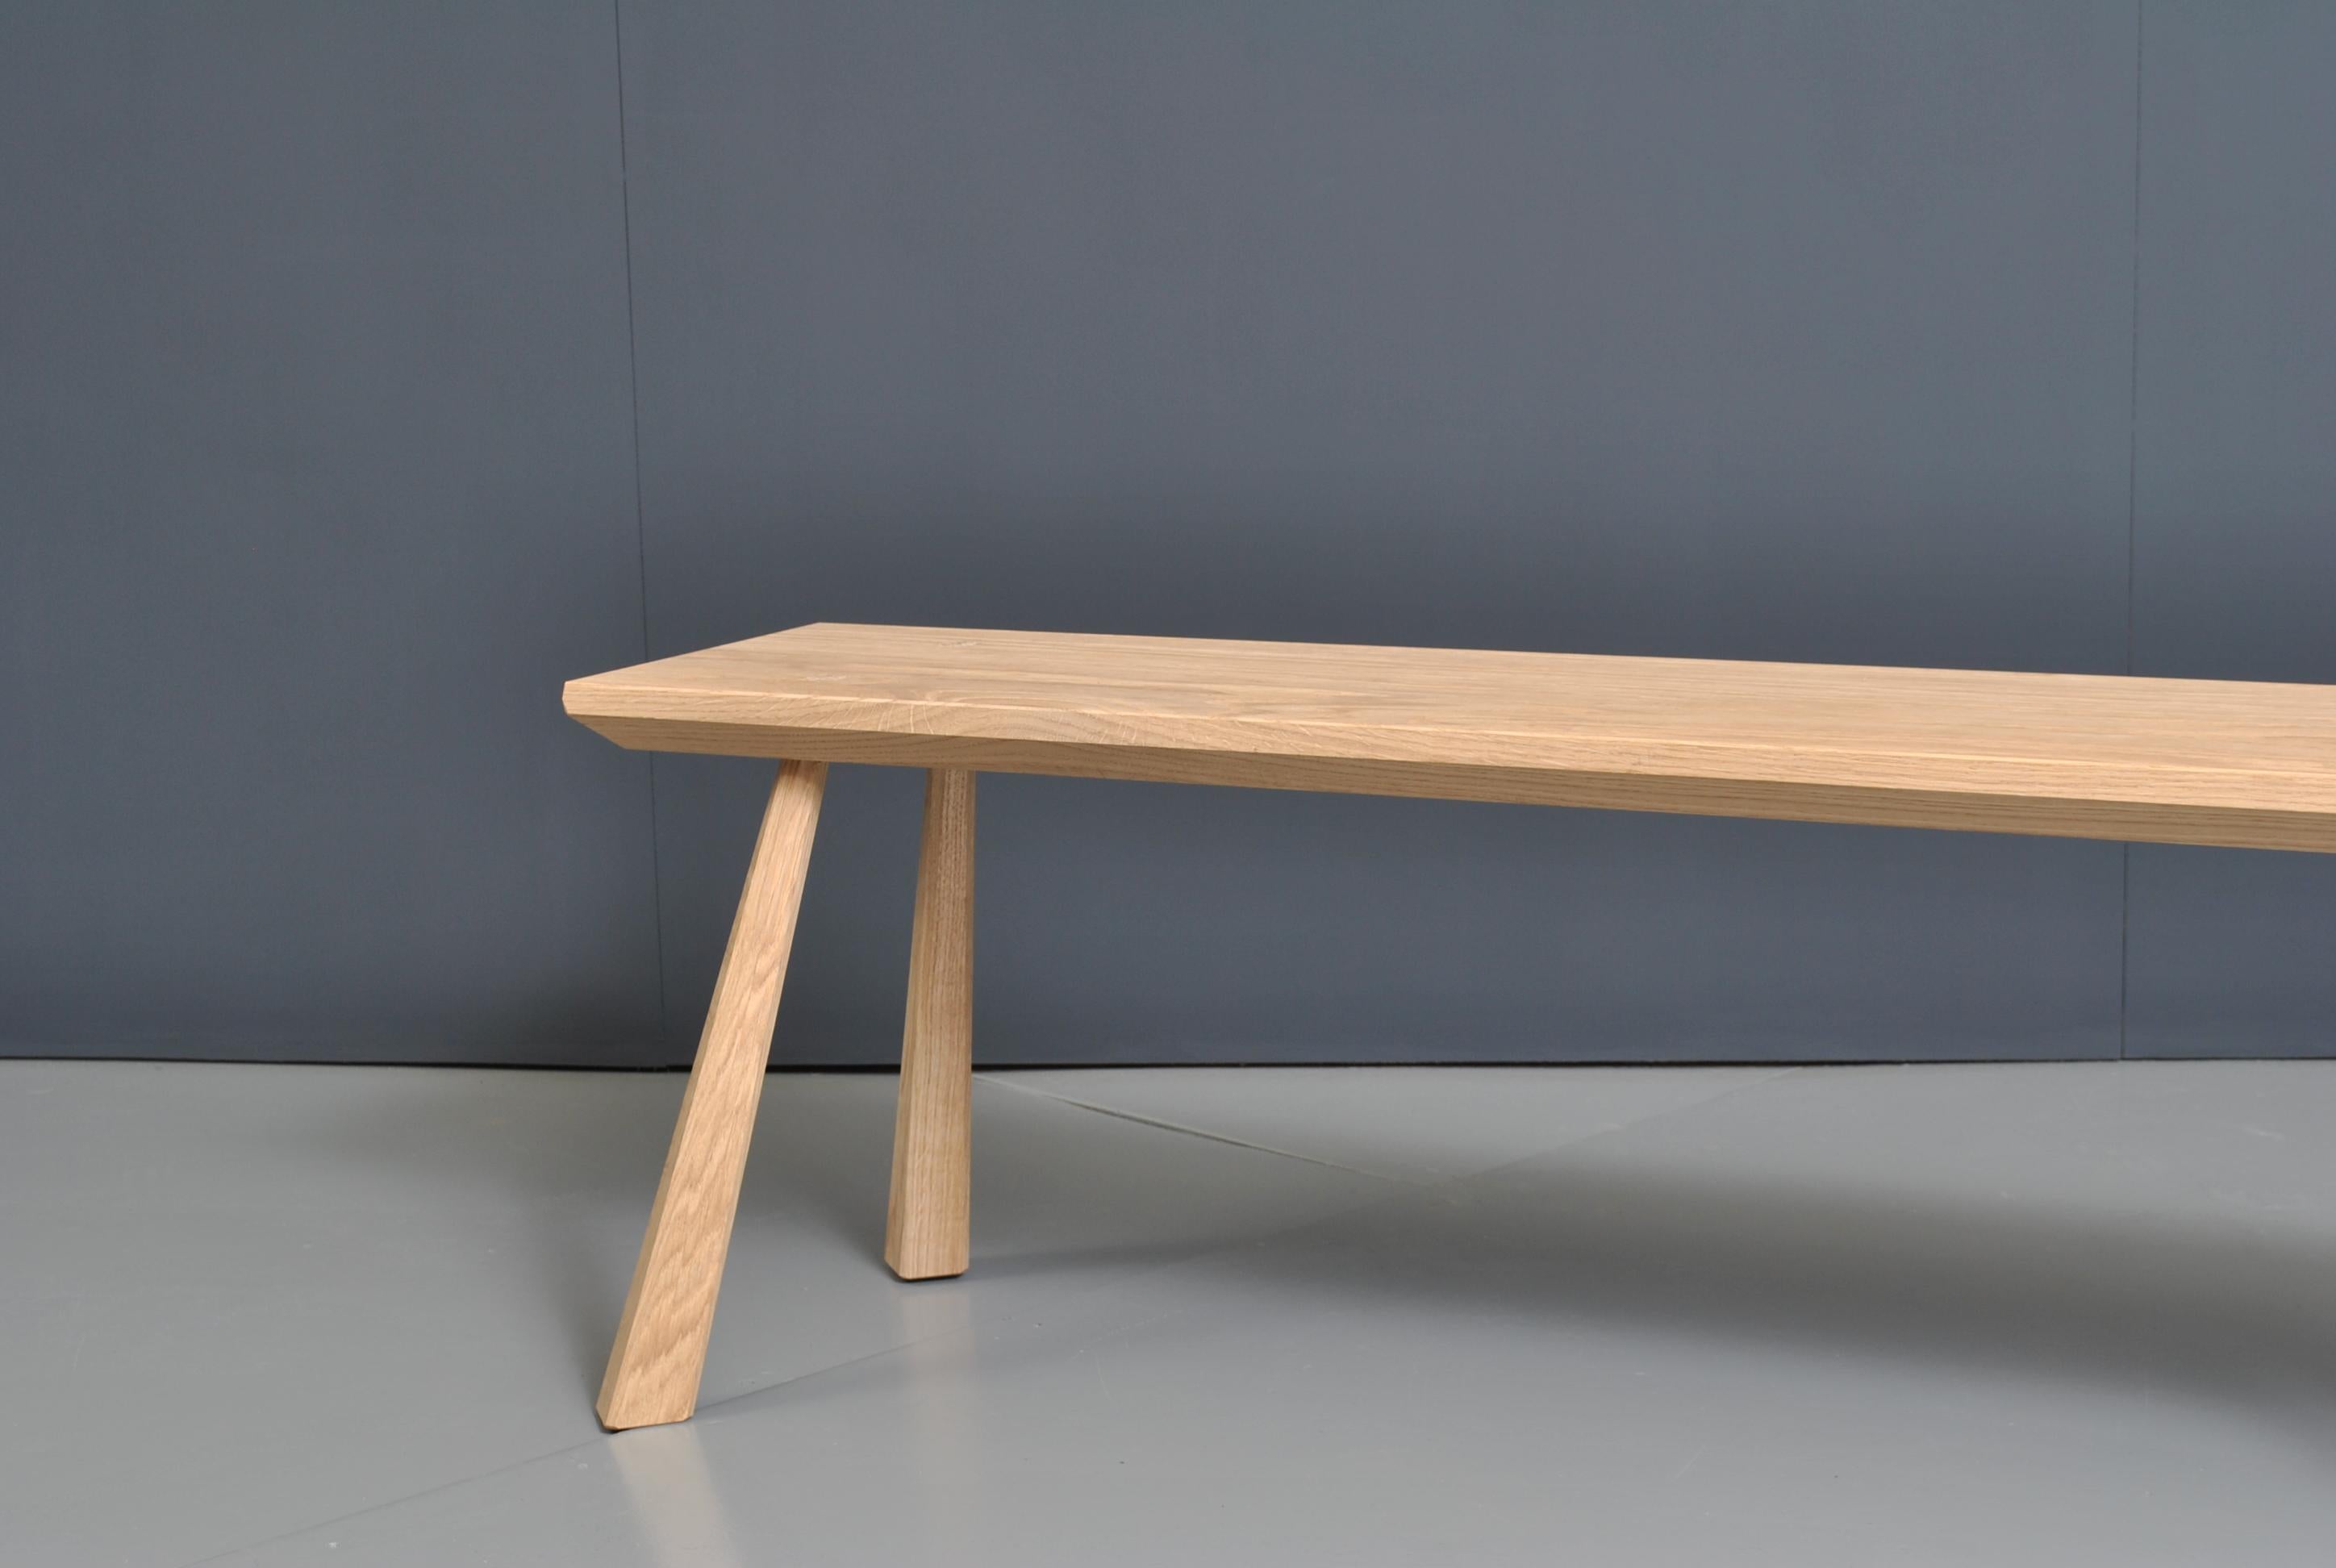 English Handcrafted Staked Oak Bench 